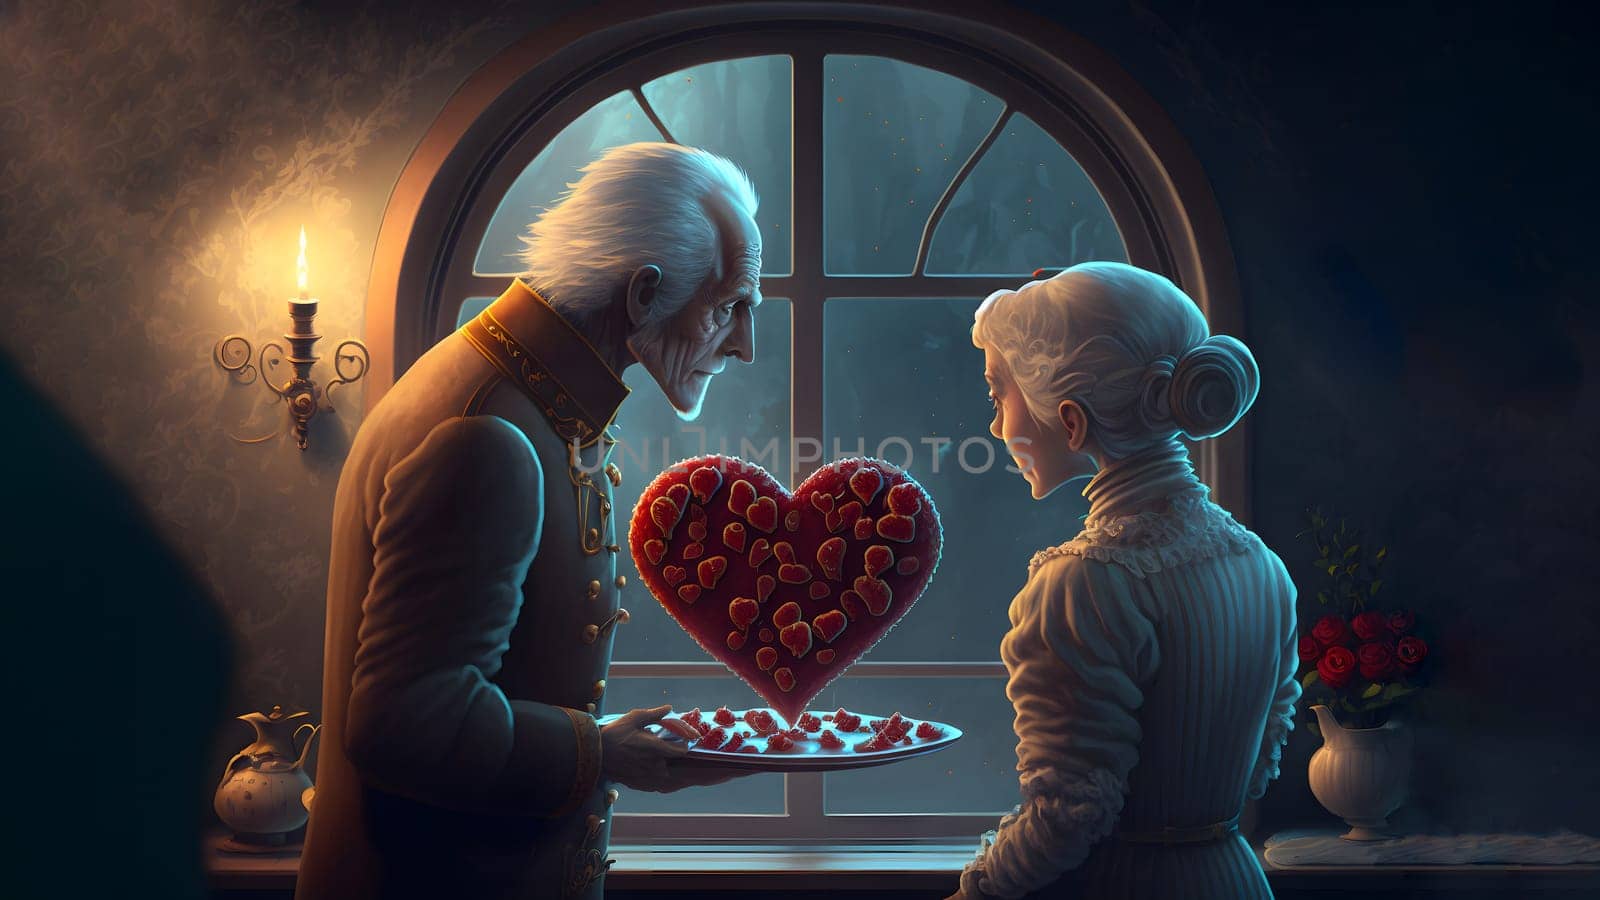 elder pair date with large red heart-shaped symbol of valentines day, neural network generated art. Digitally generated image. Not based on any actual person, scene or pattern.